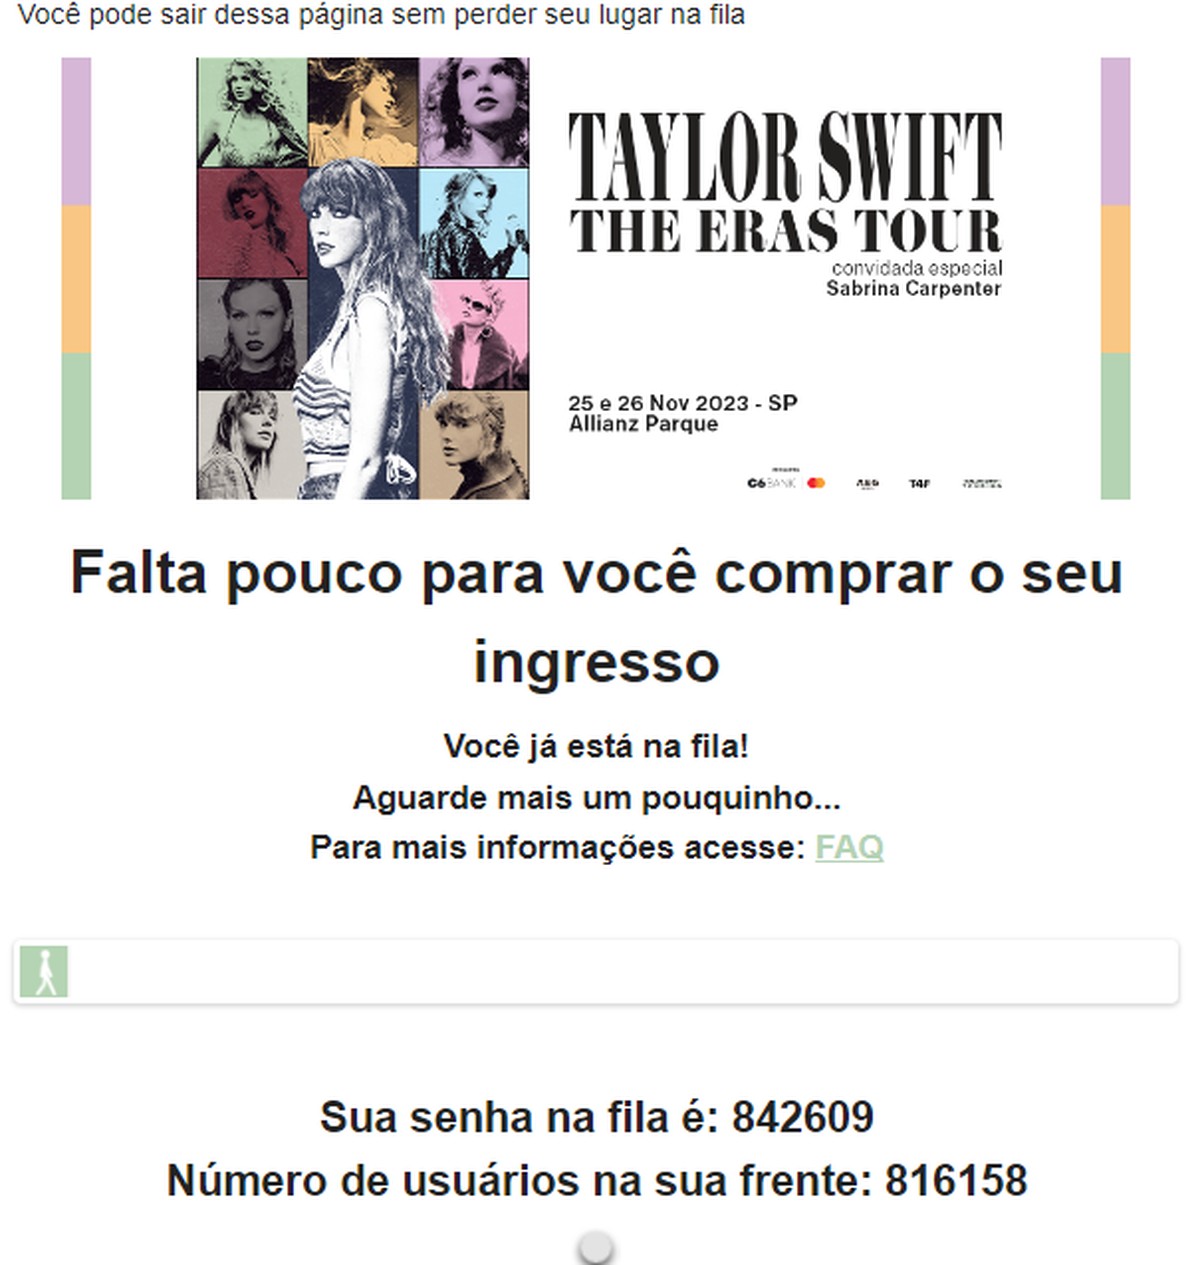 She has demand!  Taylor Swift puts more than 800,000 people in the virtual queue for the pre-sale of concert tickets in SP